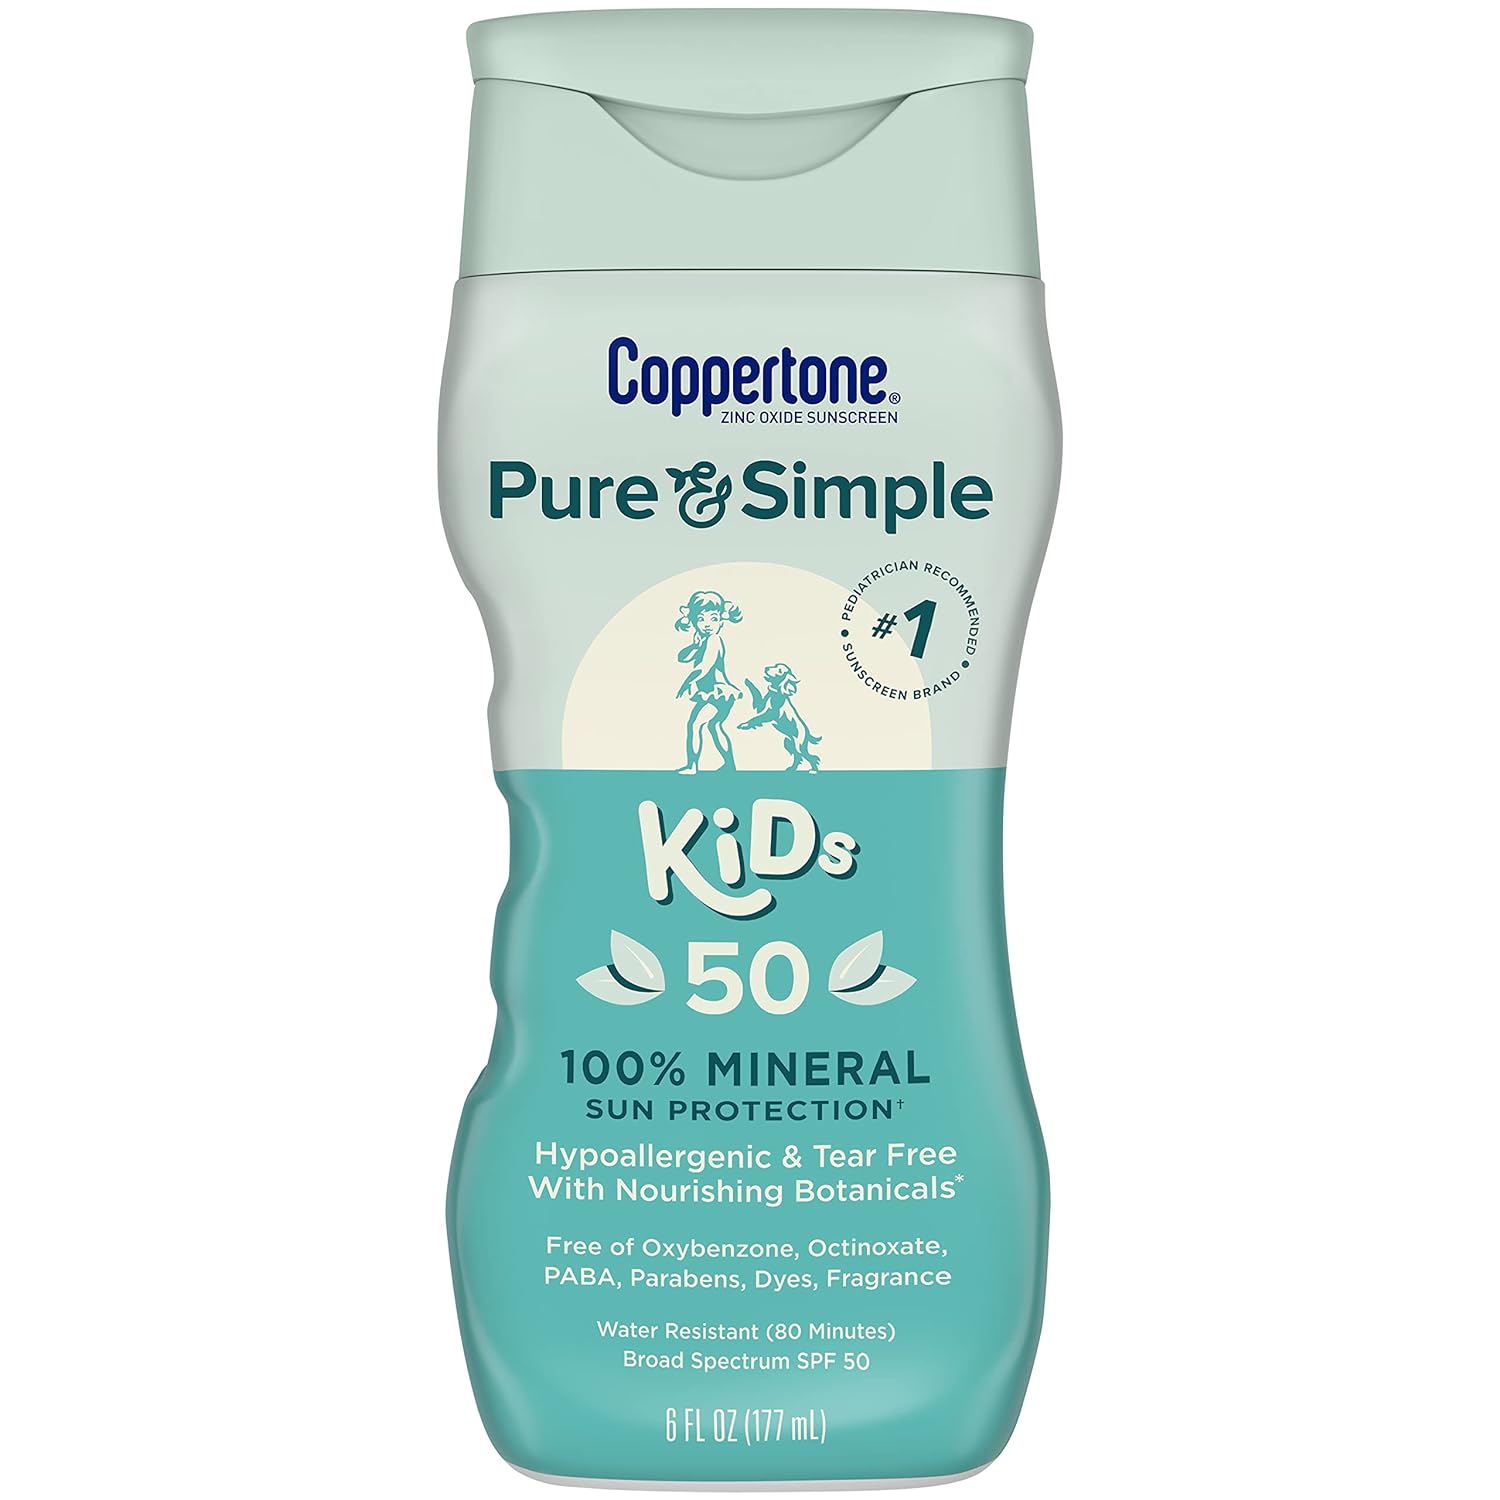 Coppertone Pure and Simple Sunscreen Lotion, Zinc Oxide Mineral Sunscreen for Kids, Tear Free, Broad Spectrum SPF 50 Sunscreen, 6 Fl Oz Bottle